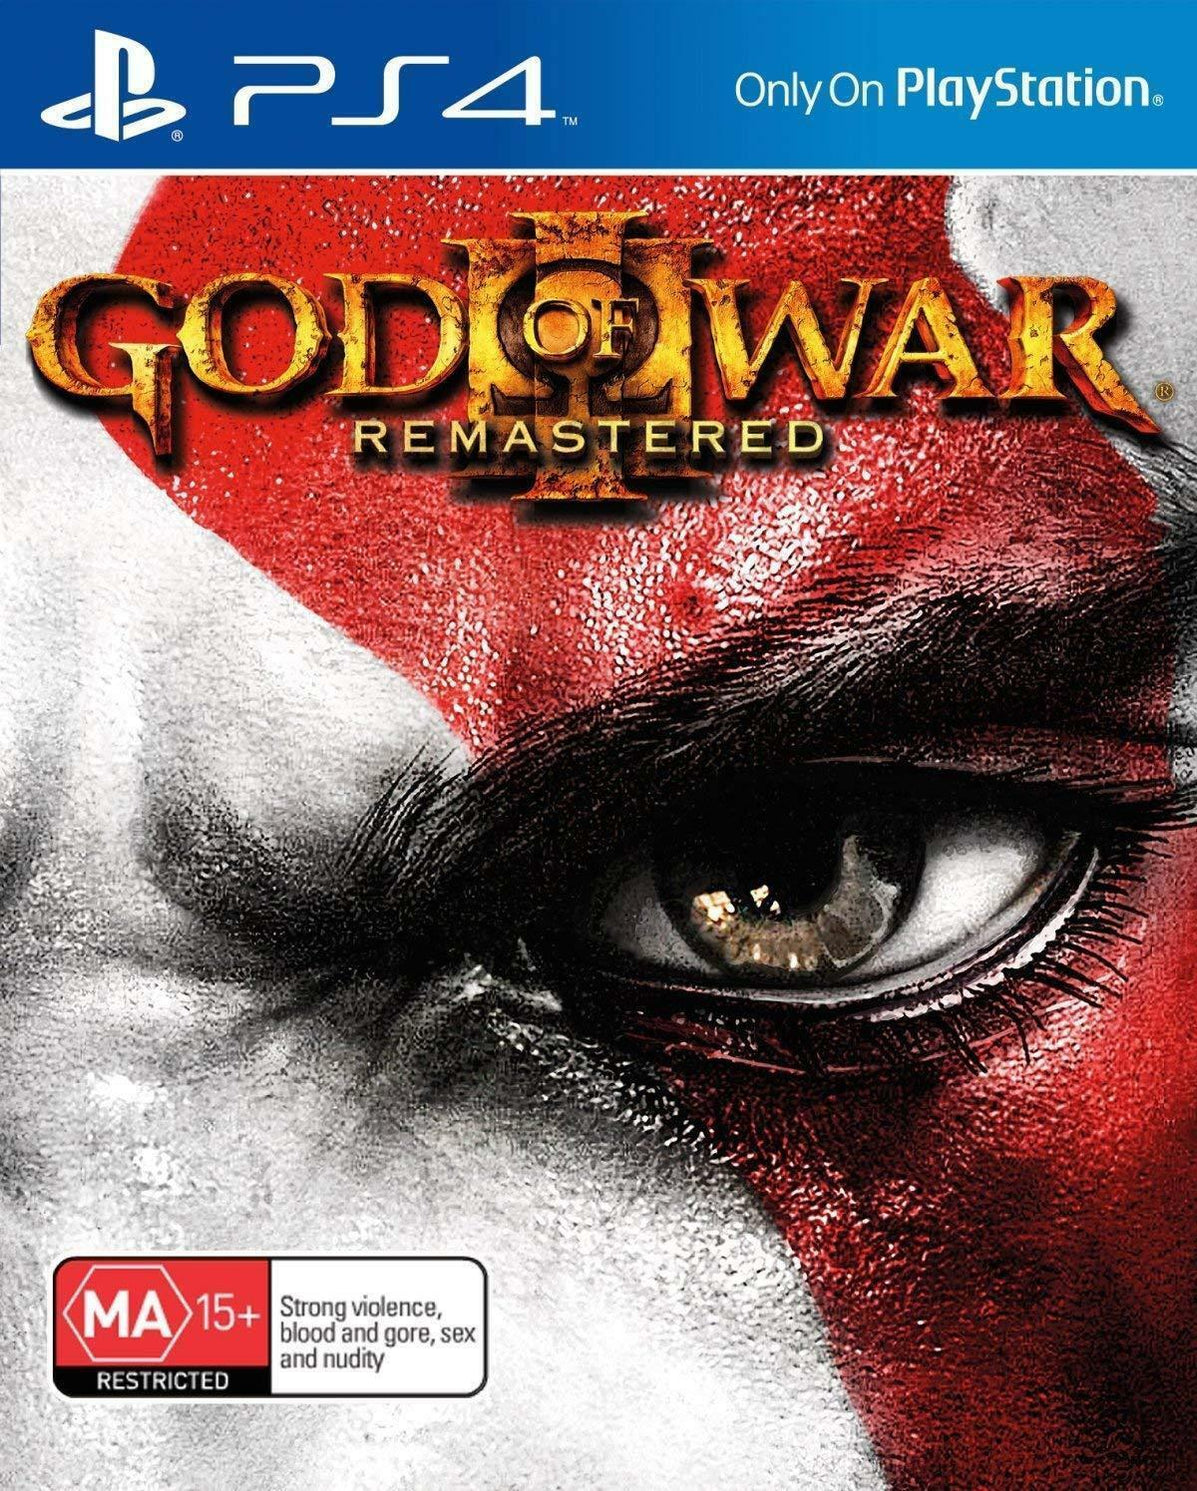 brand-new-god-of-war-3-remastered-playstation-4-ps4-ma-15-game-repoguys